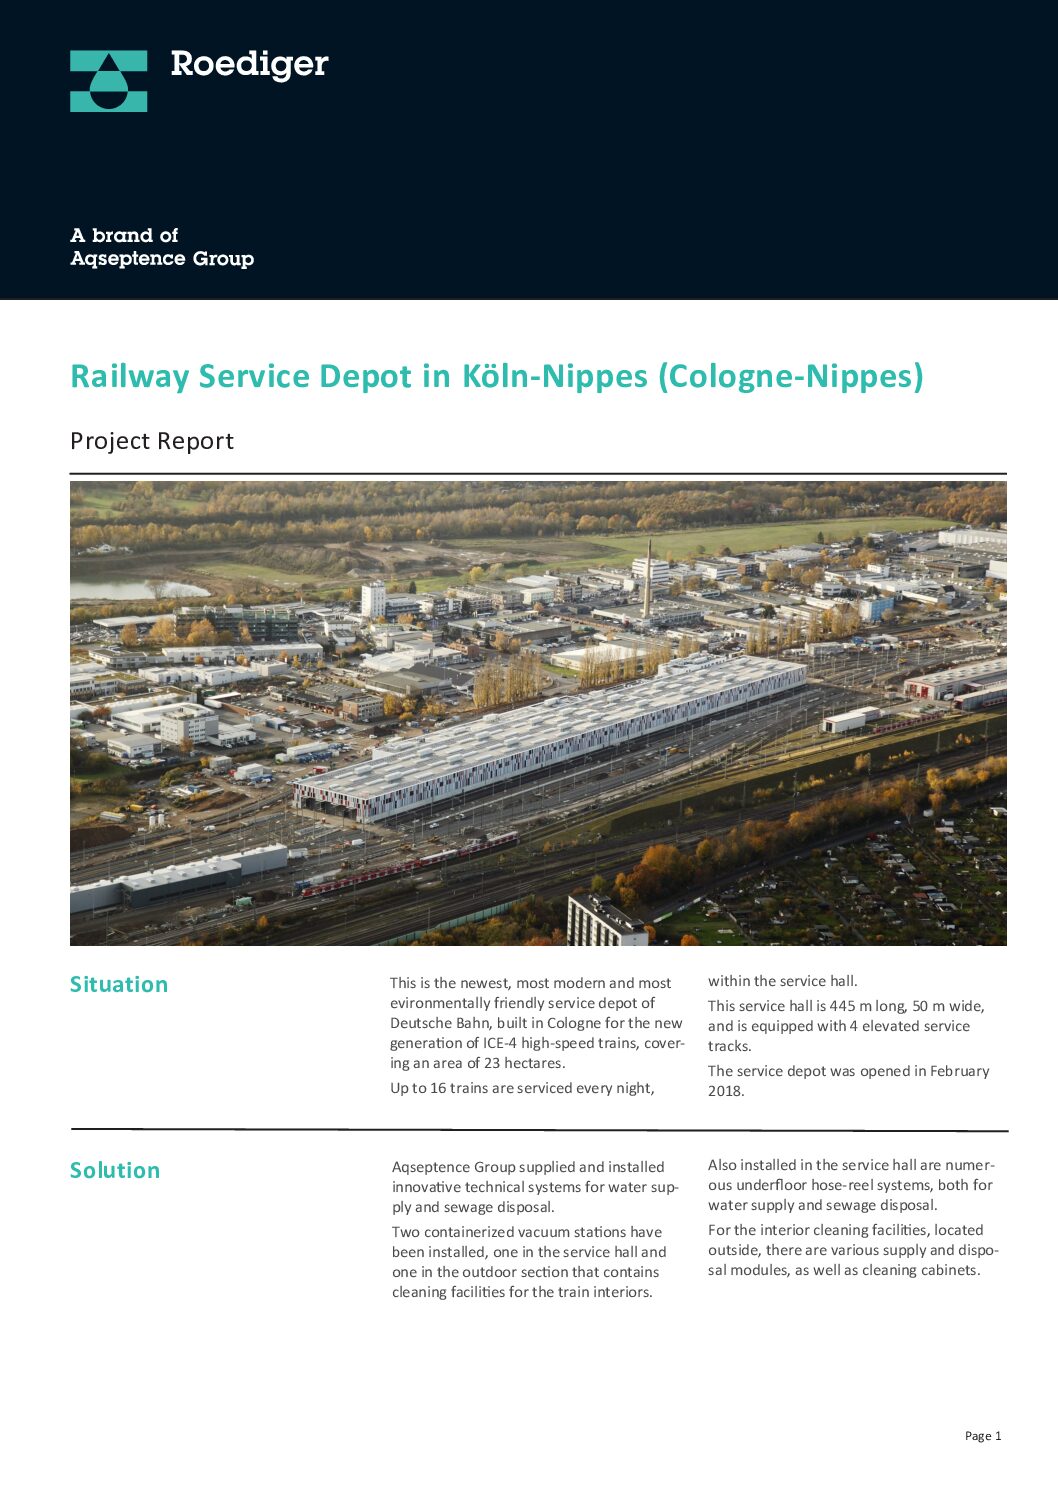 Case Study: Service Depot in Cologne-Nippes